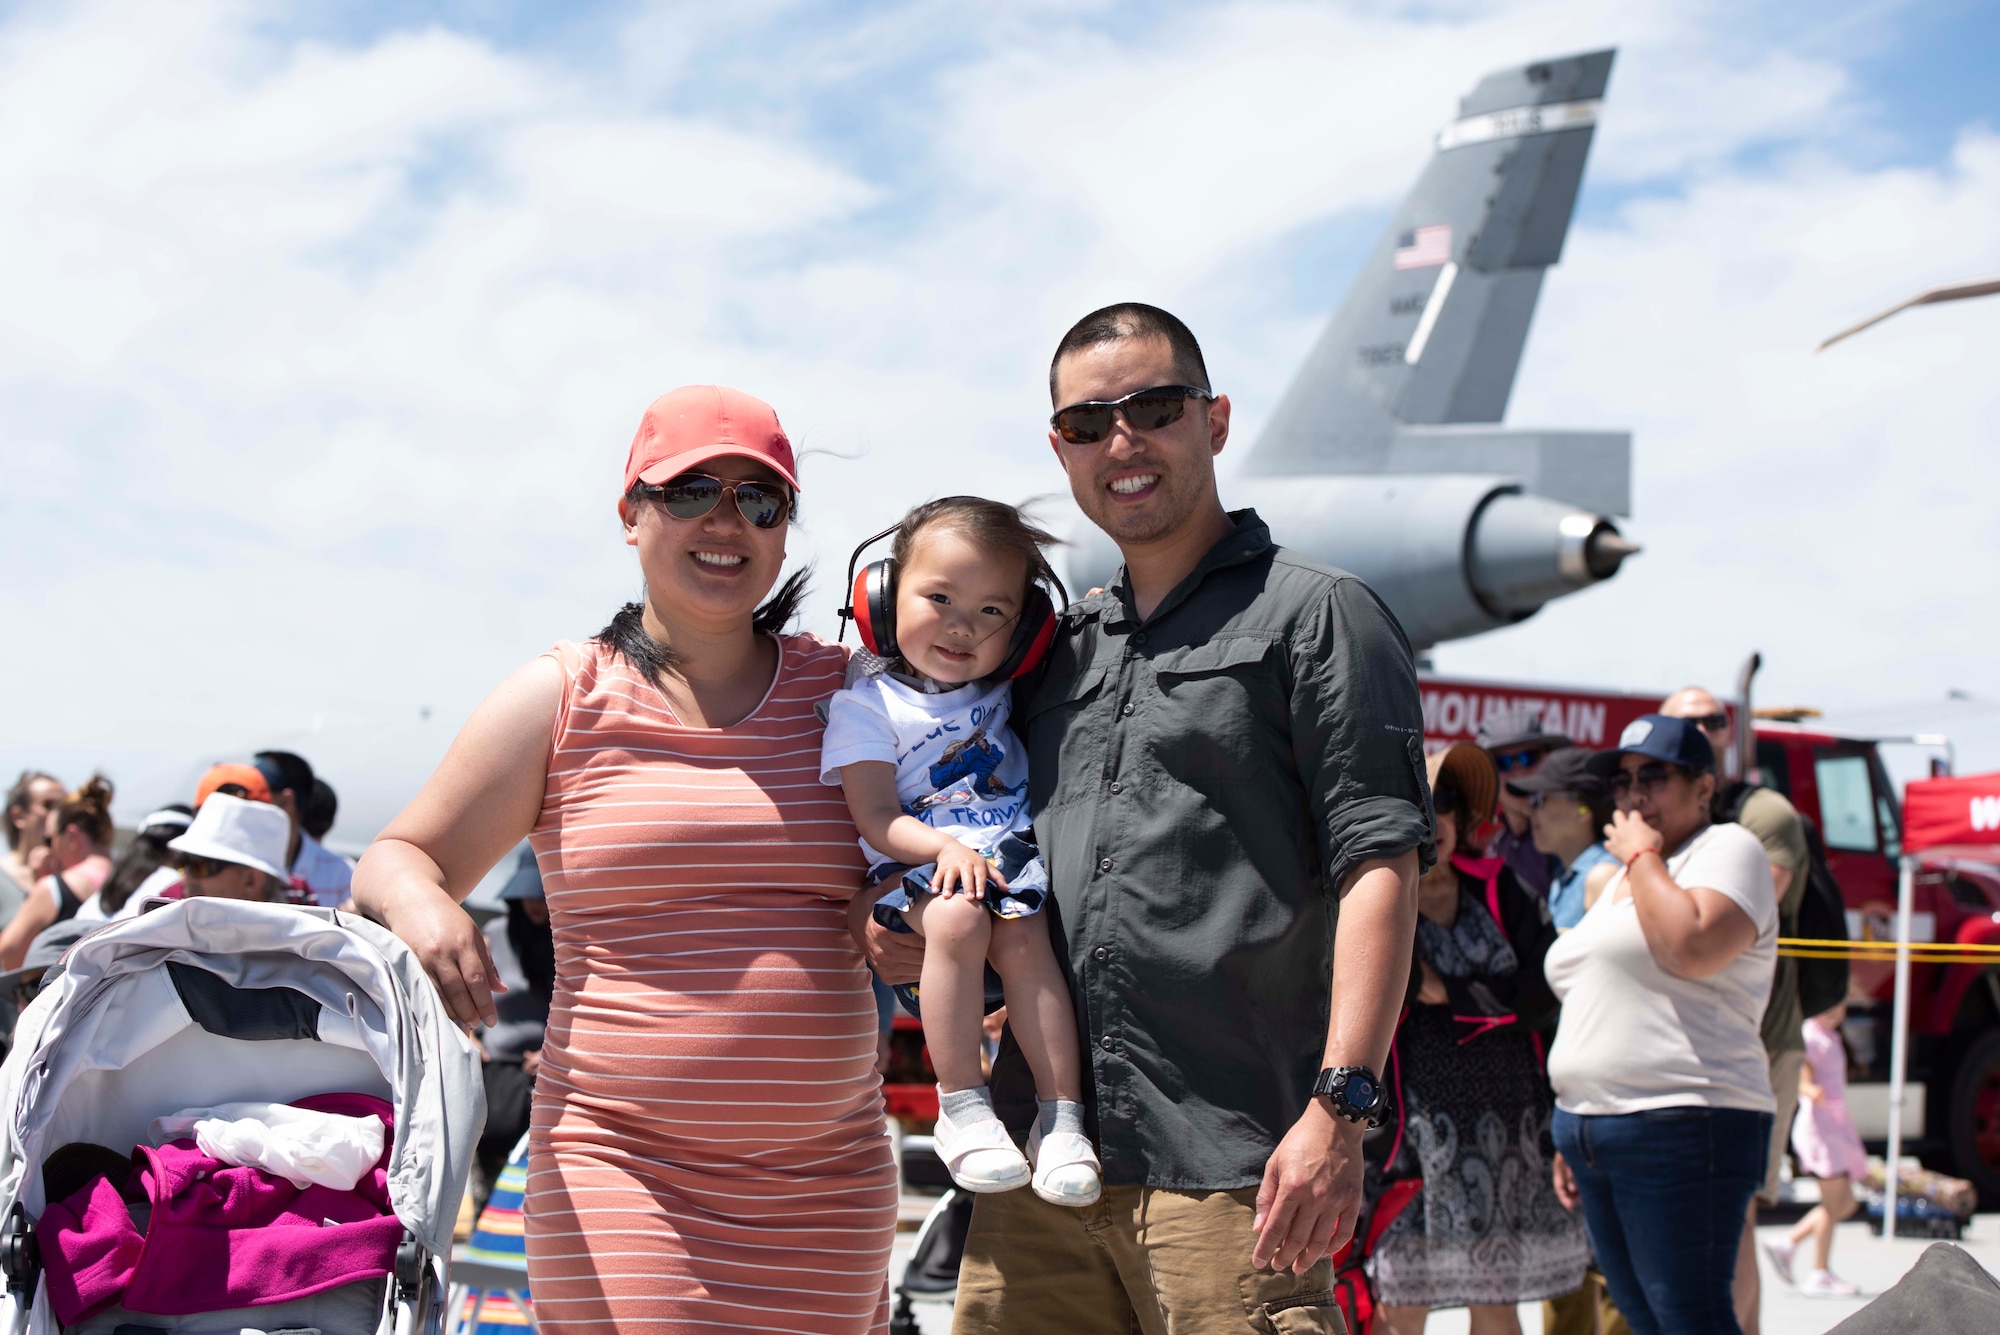 Family gathers for photo at an air show